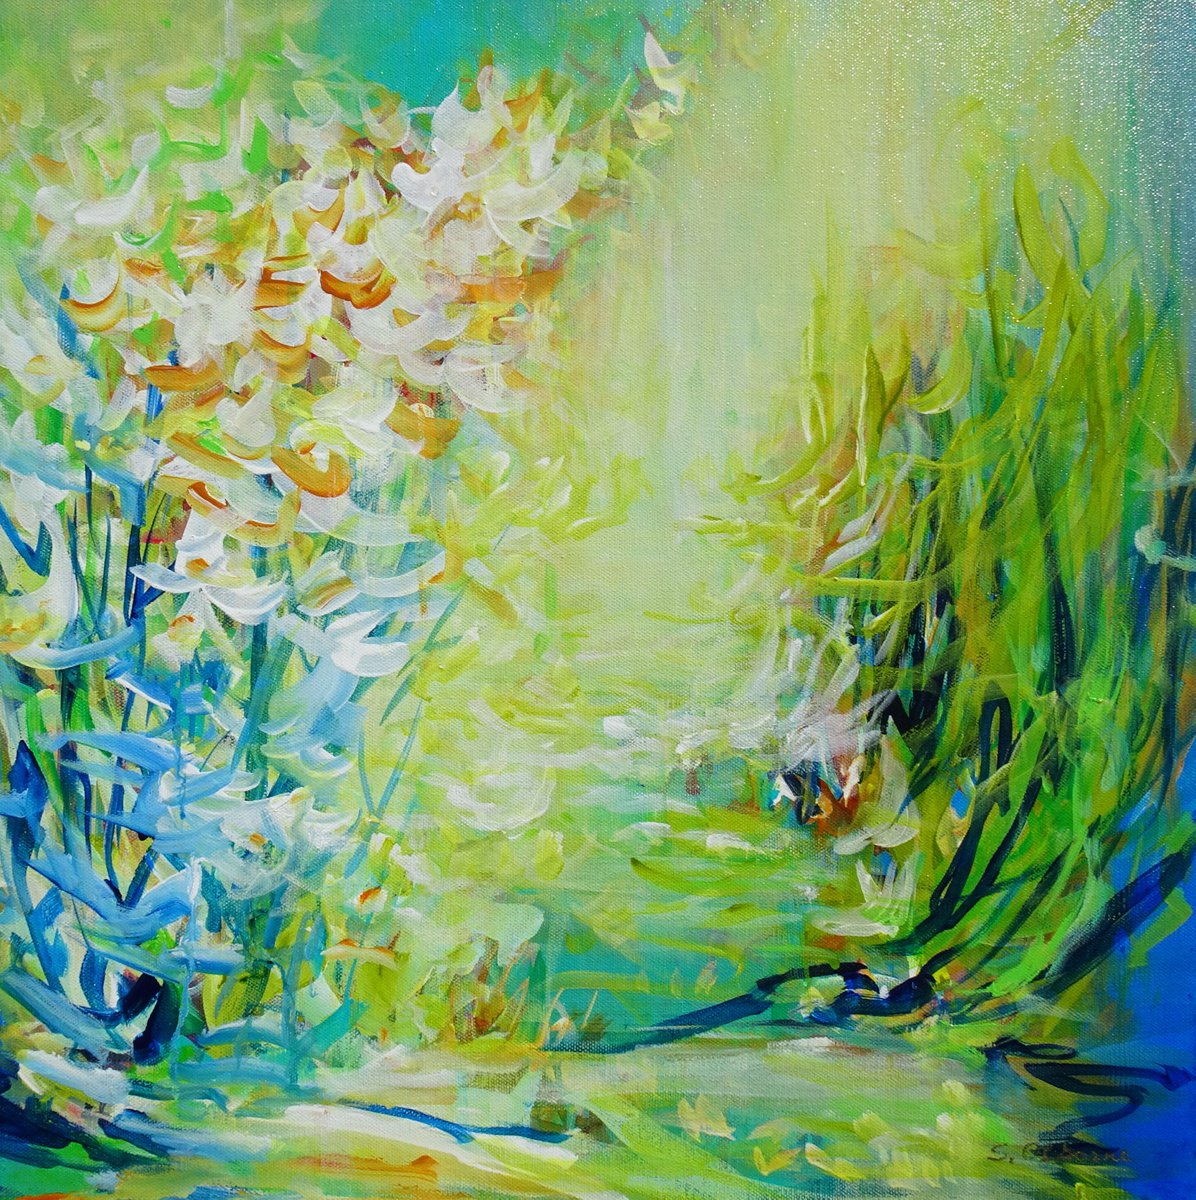 Abstract Forest Pond Painting II. Floral Garden. Abstract Tropical Flowers and Birds. Orig... by Sveta Osborne